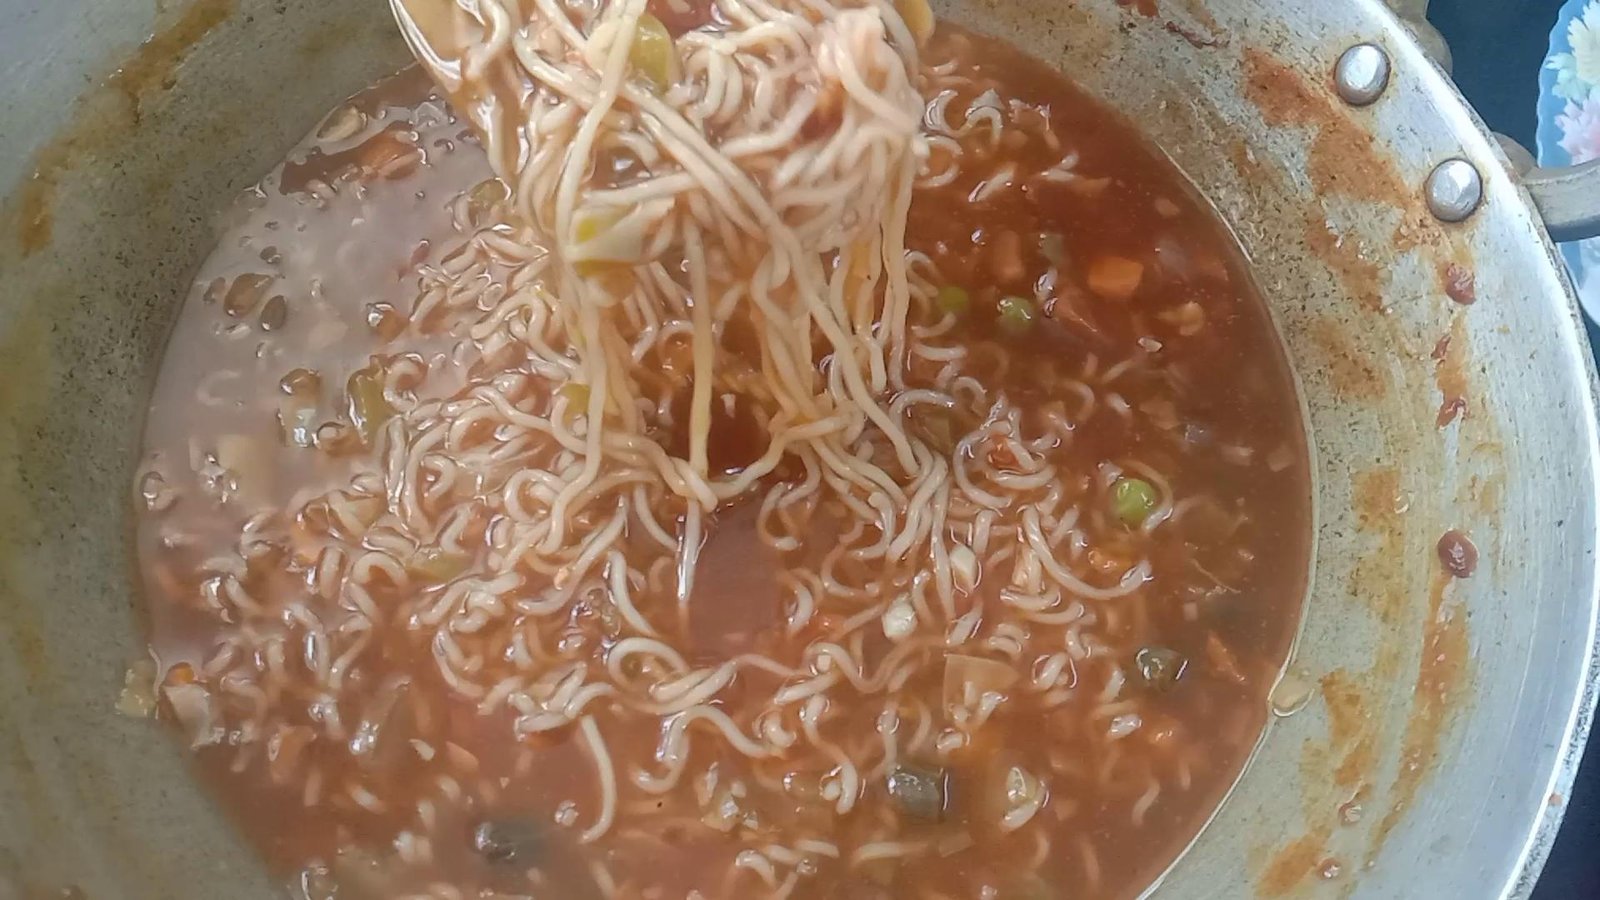 Cooked noodles in soup, Maggi noodles recipe. 